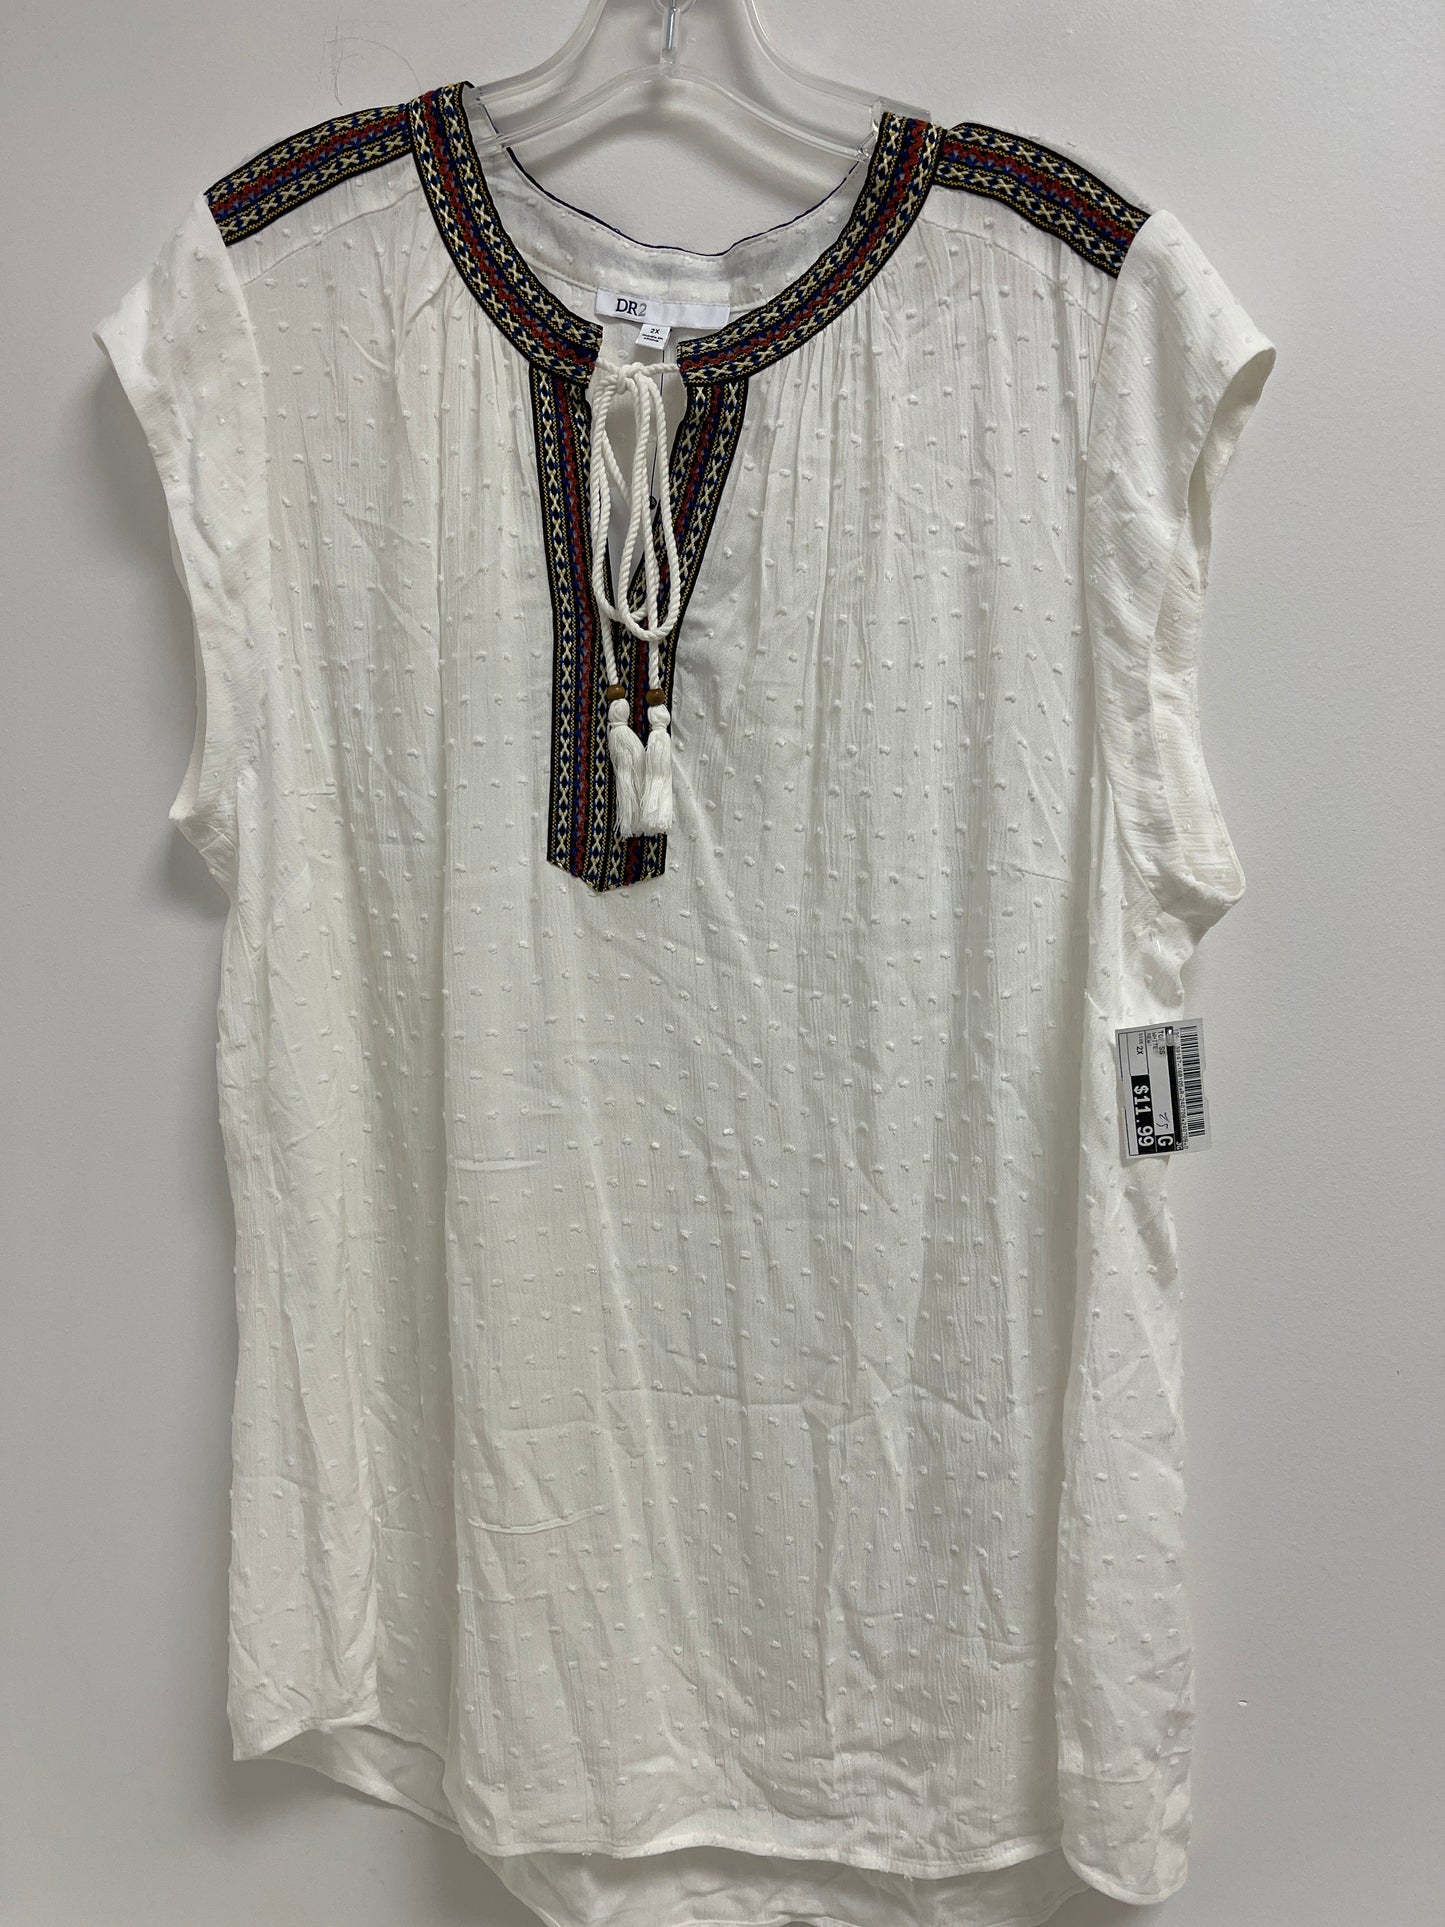 White Top Short Sleeve Dr2, Size 2x